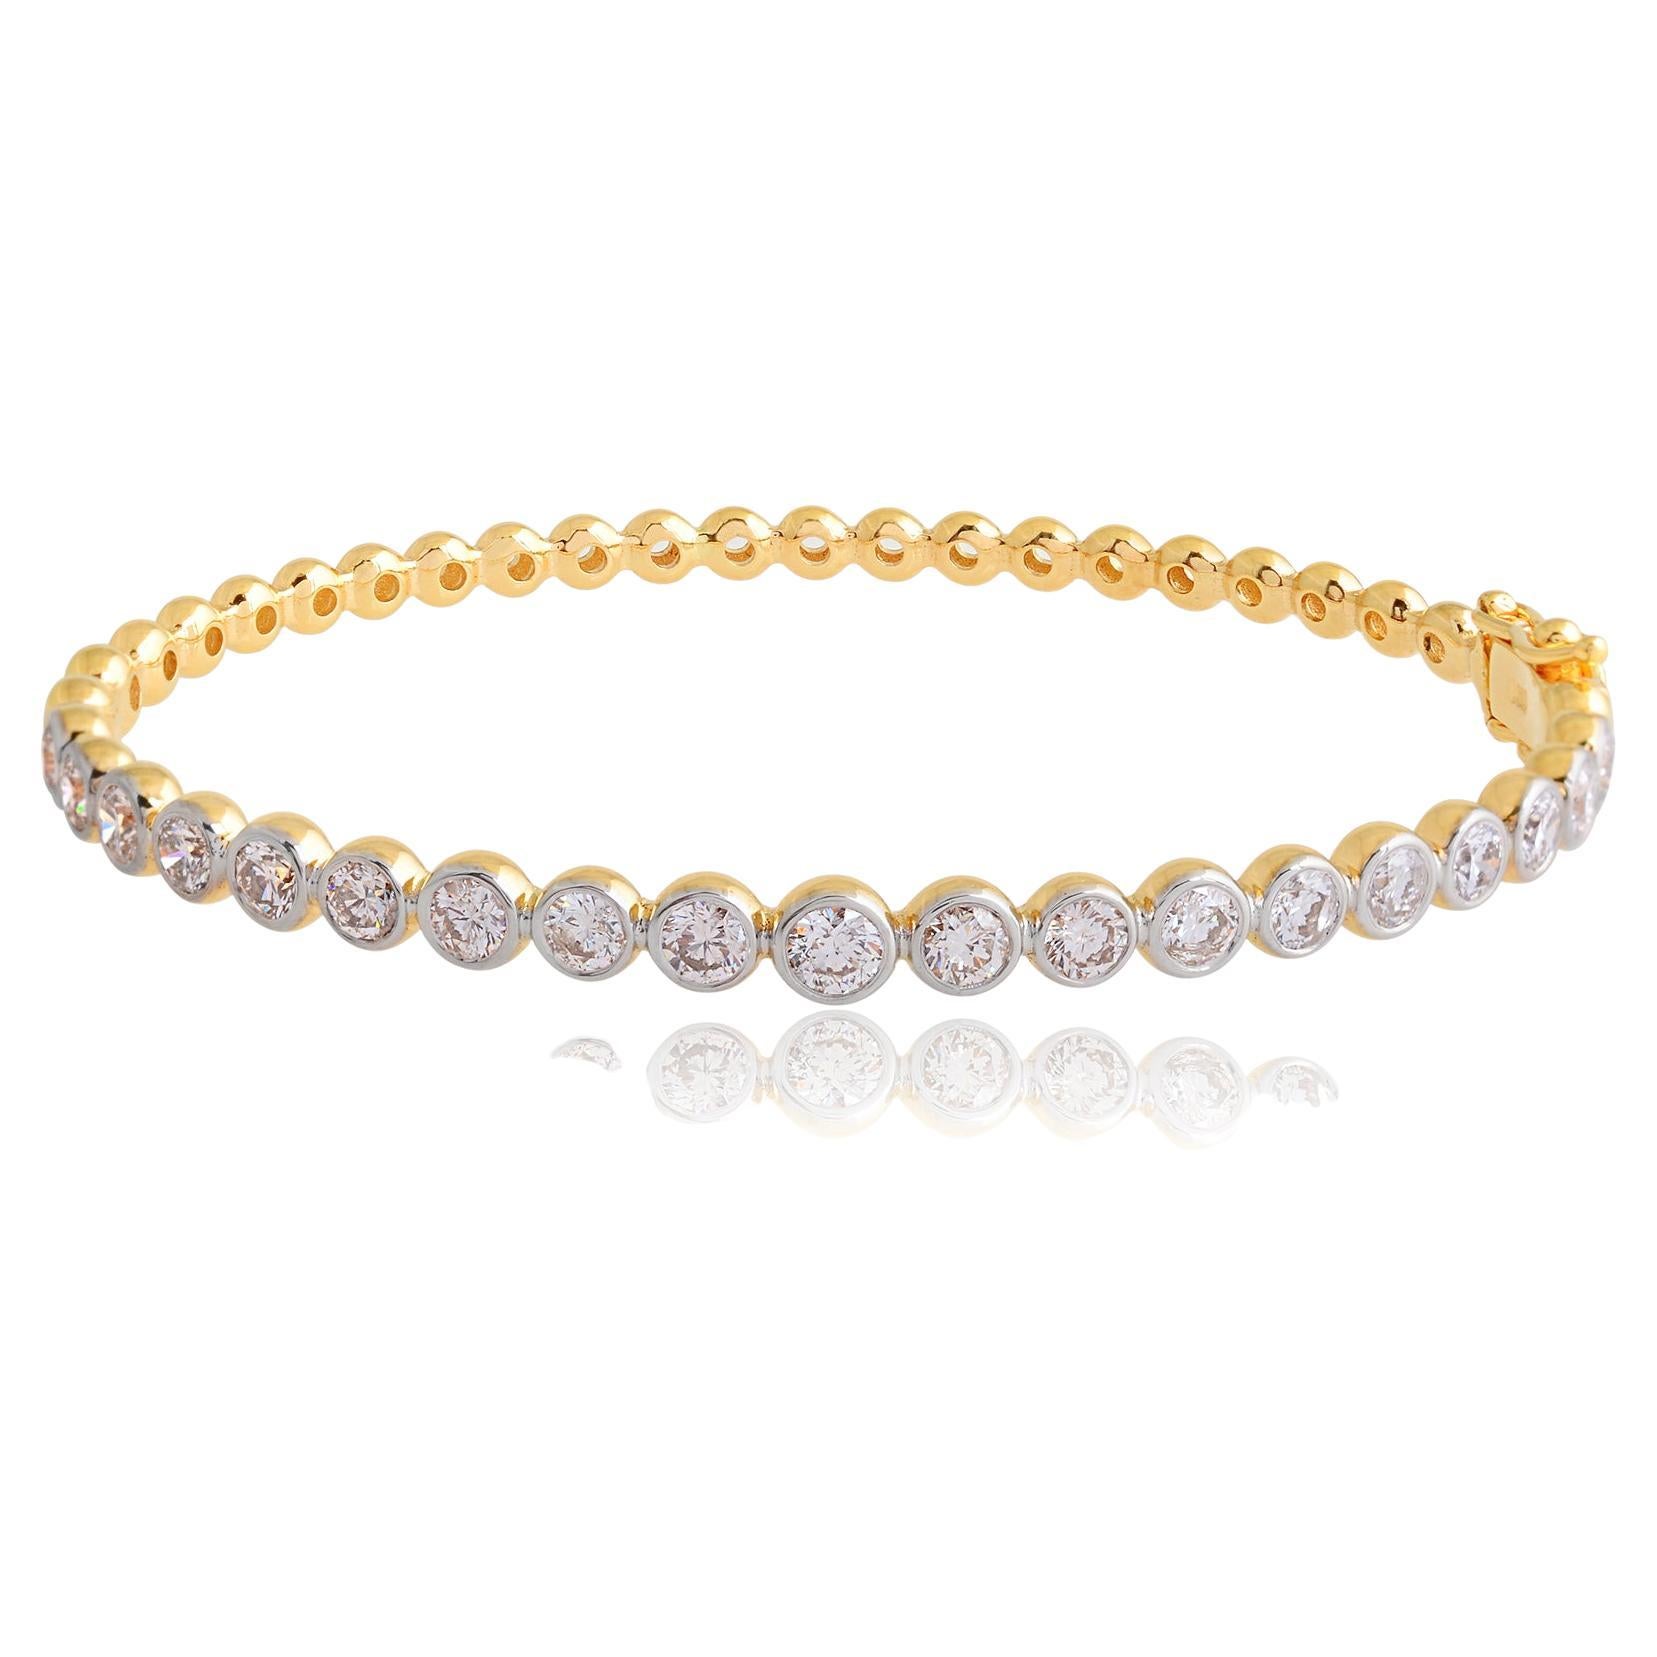 2.70 Carat Single Line Natural Diamond Bracelet Solid 18k Yellow Gold Jewelry For Sale